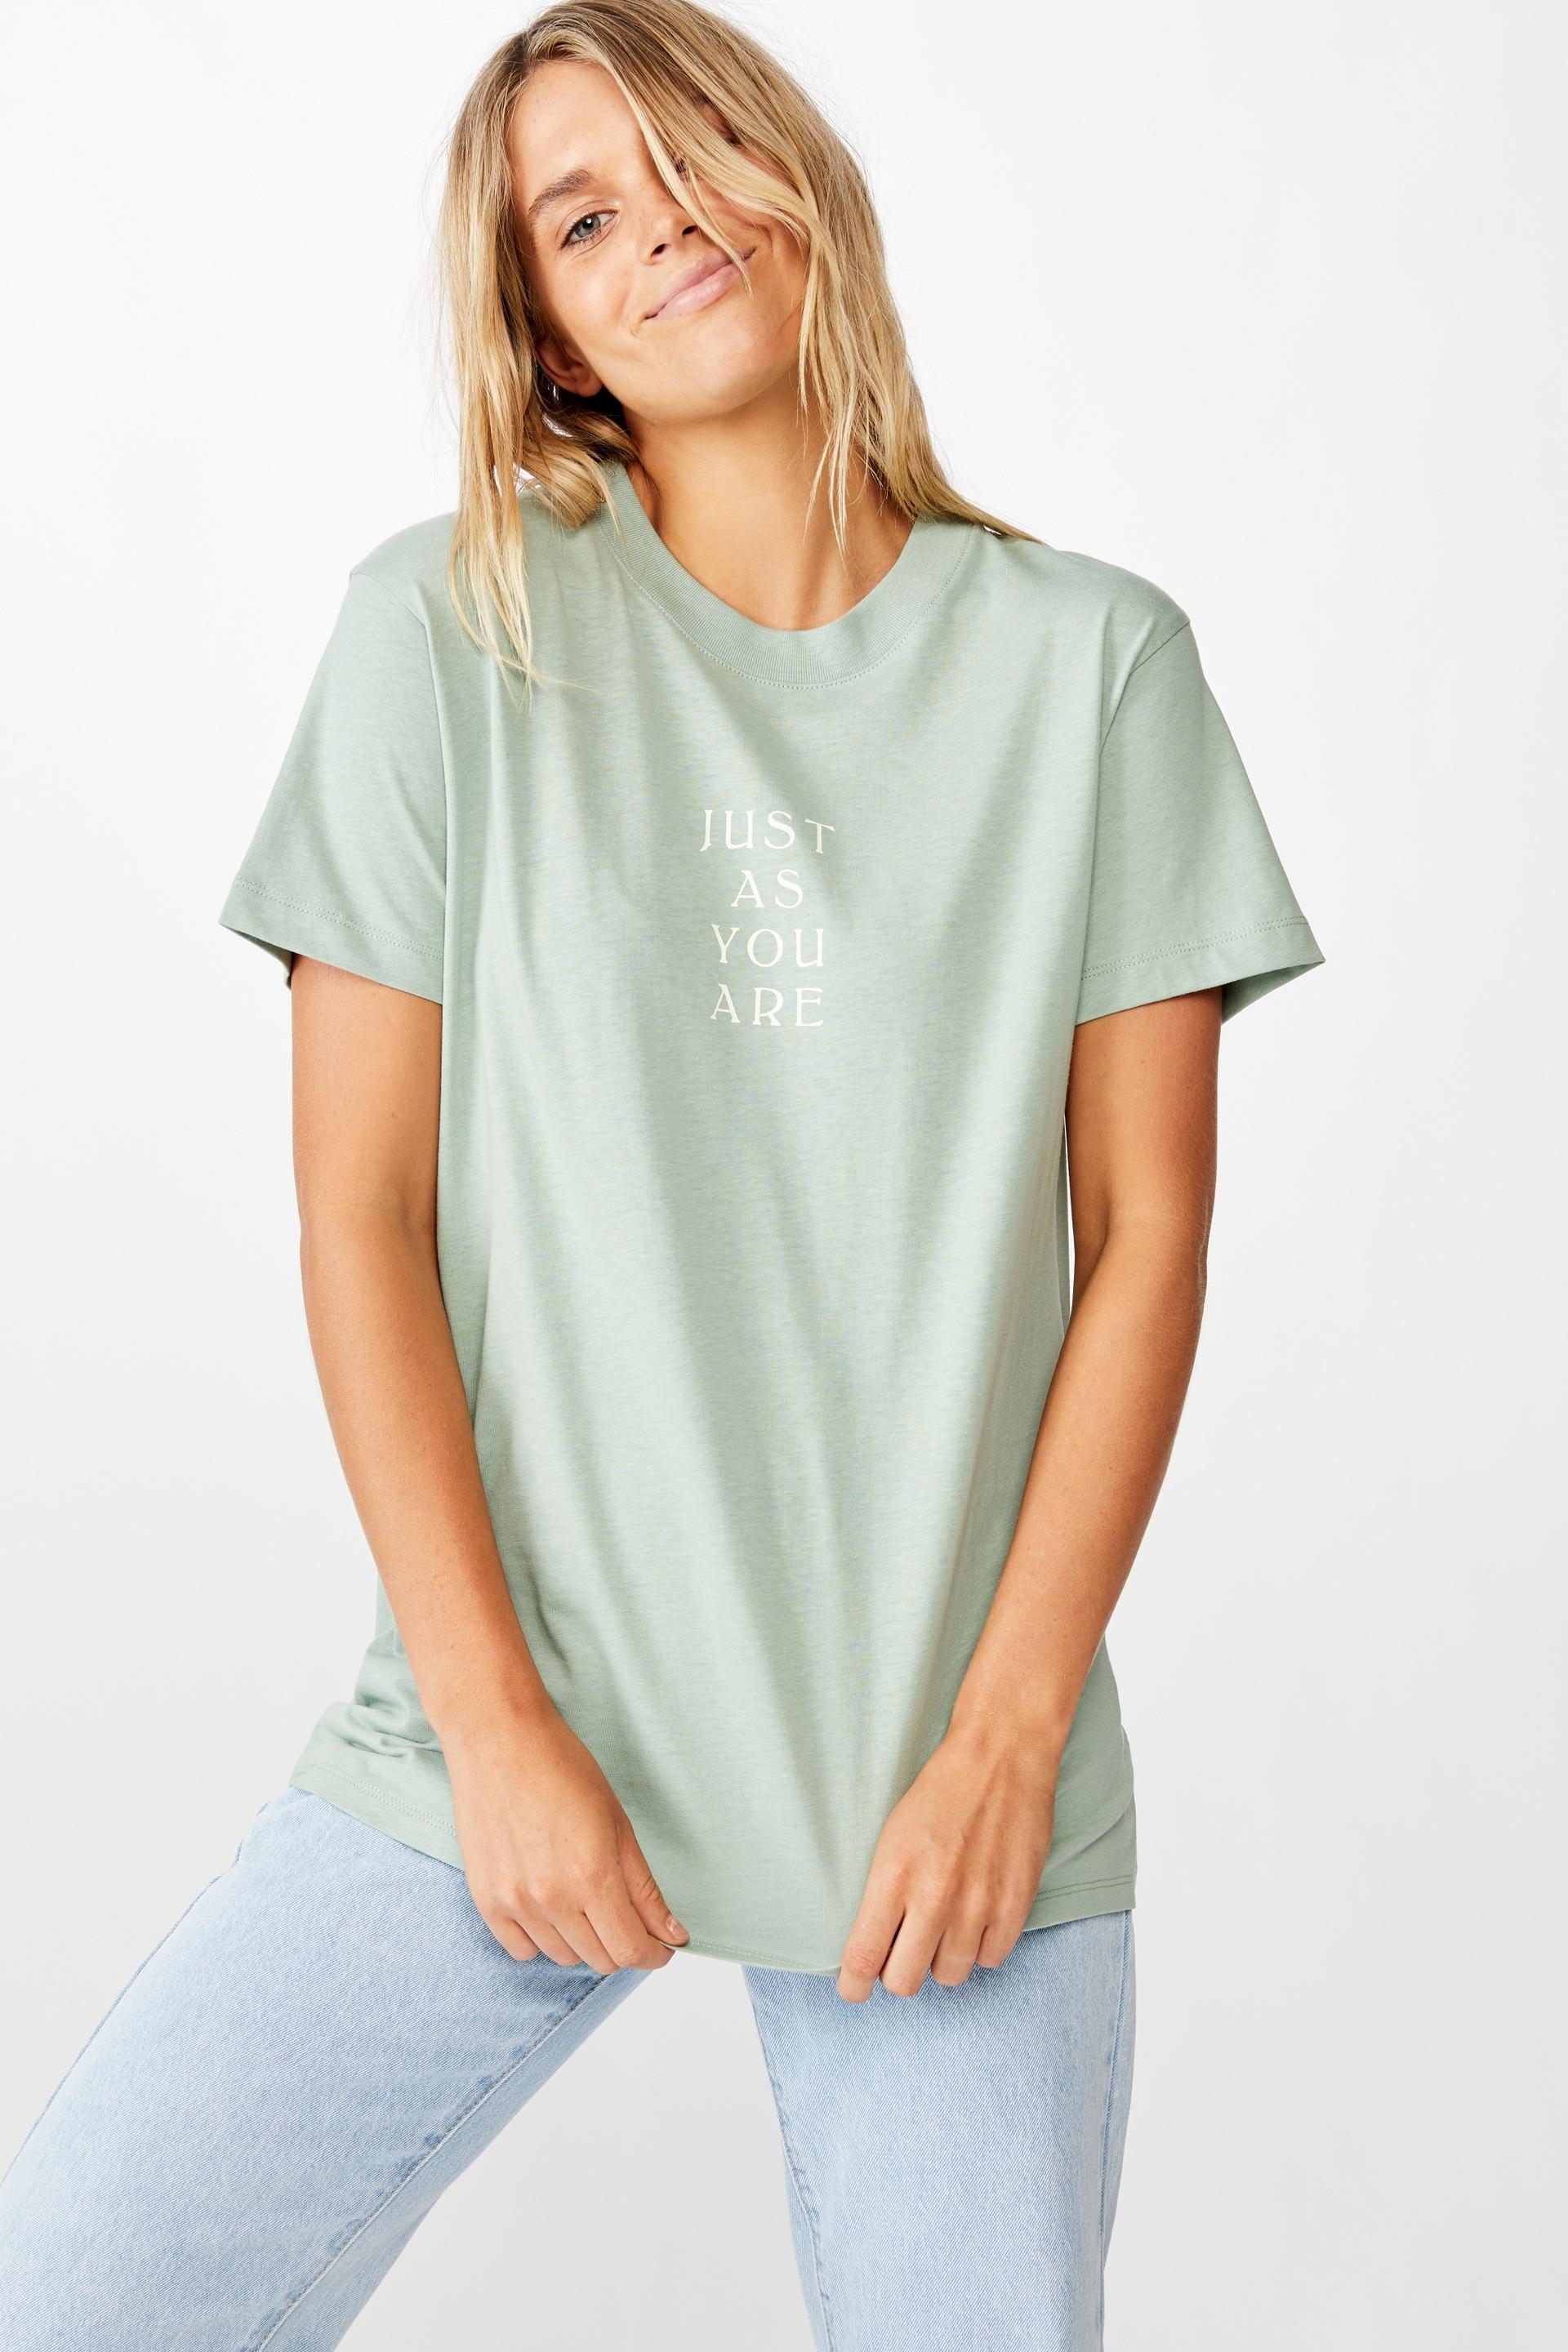 Classic slogan t shirt just as you are - jade Cotton On T-Shirts, Vests ...